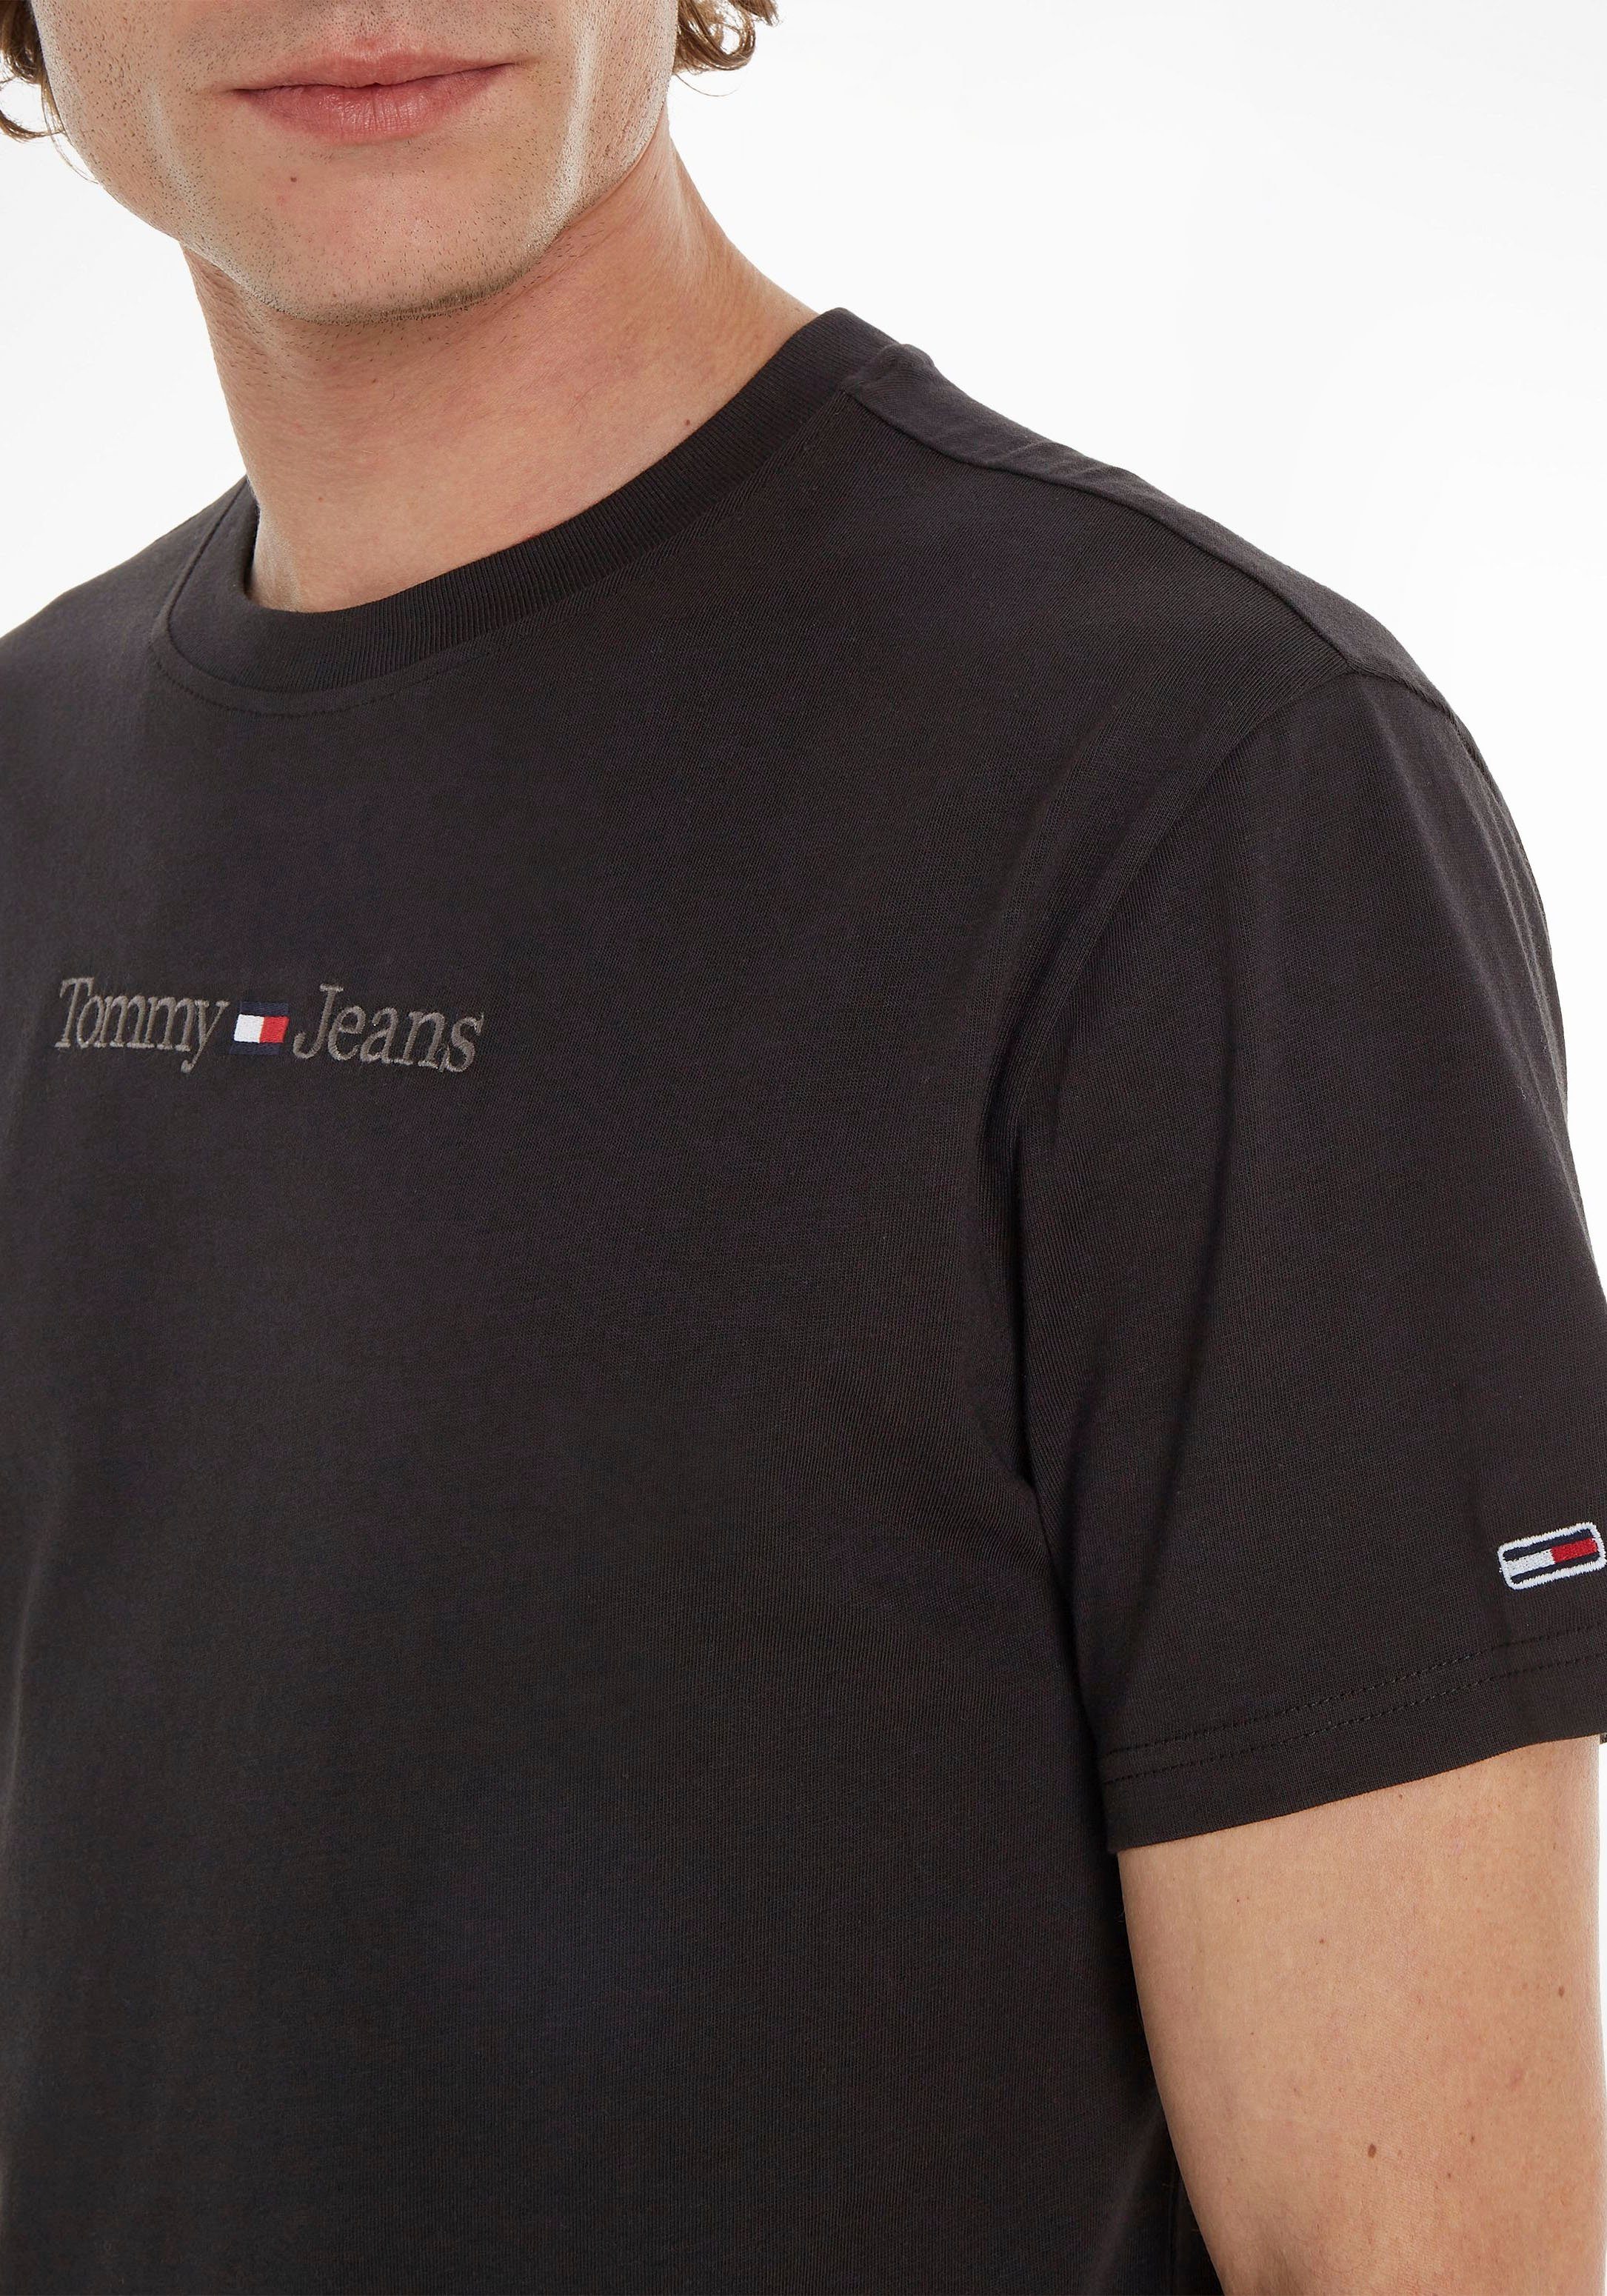 TEE TJM SMALL Tommy Jeans T-Shirt TEXT Black CLSC